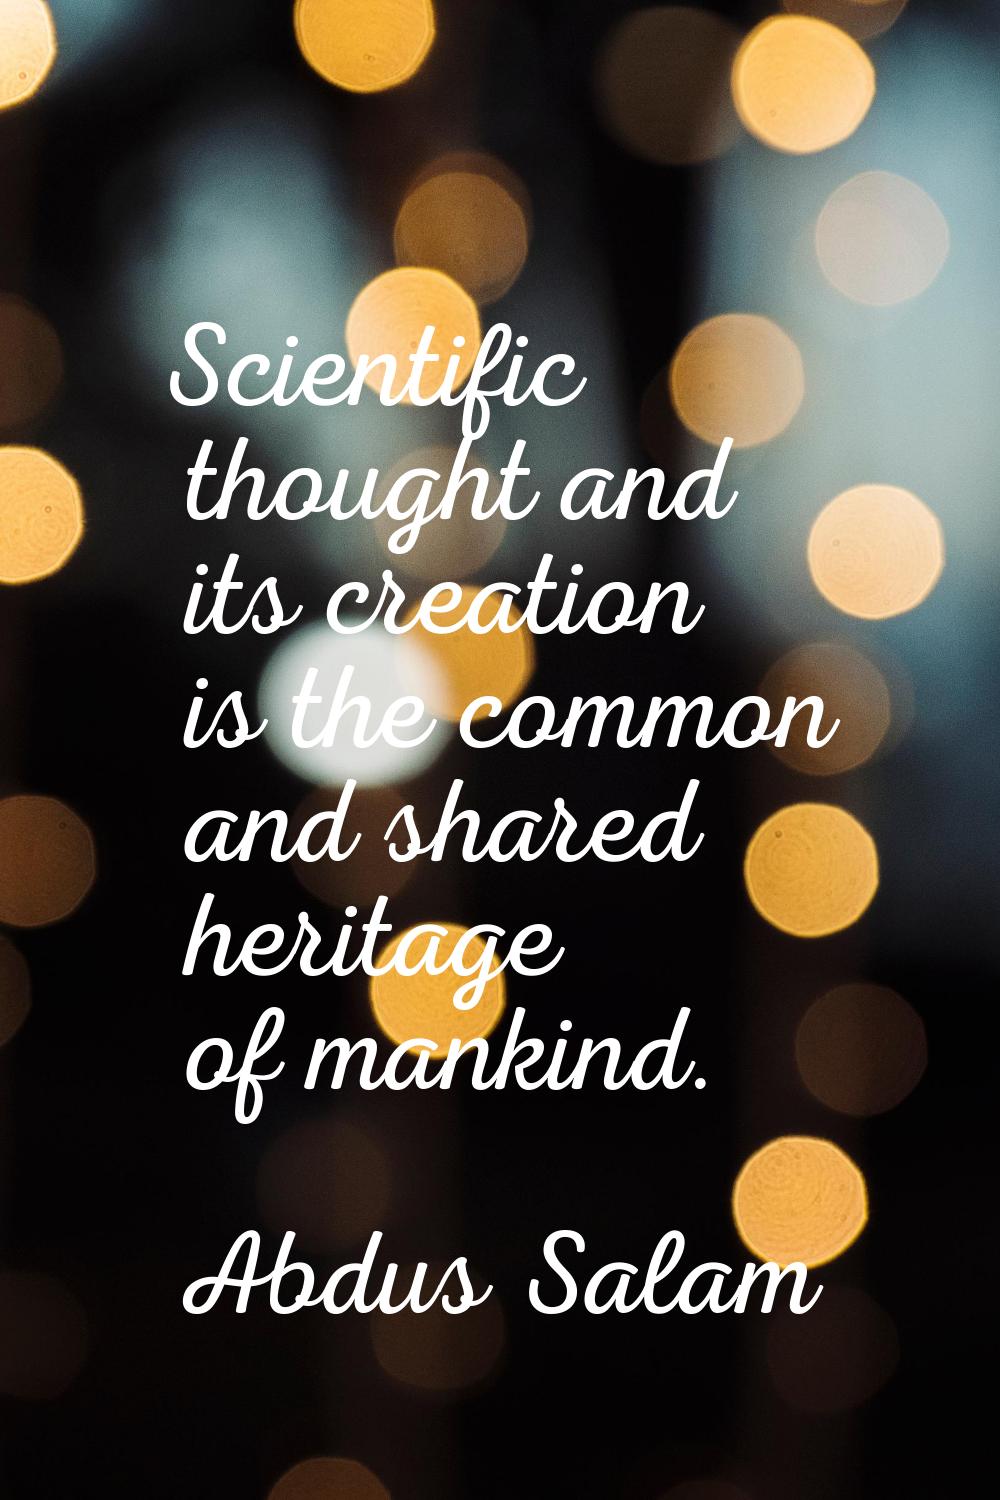 Scientific thought and its creation is the common and shared heritage of mankind.